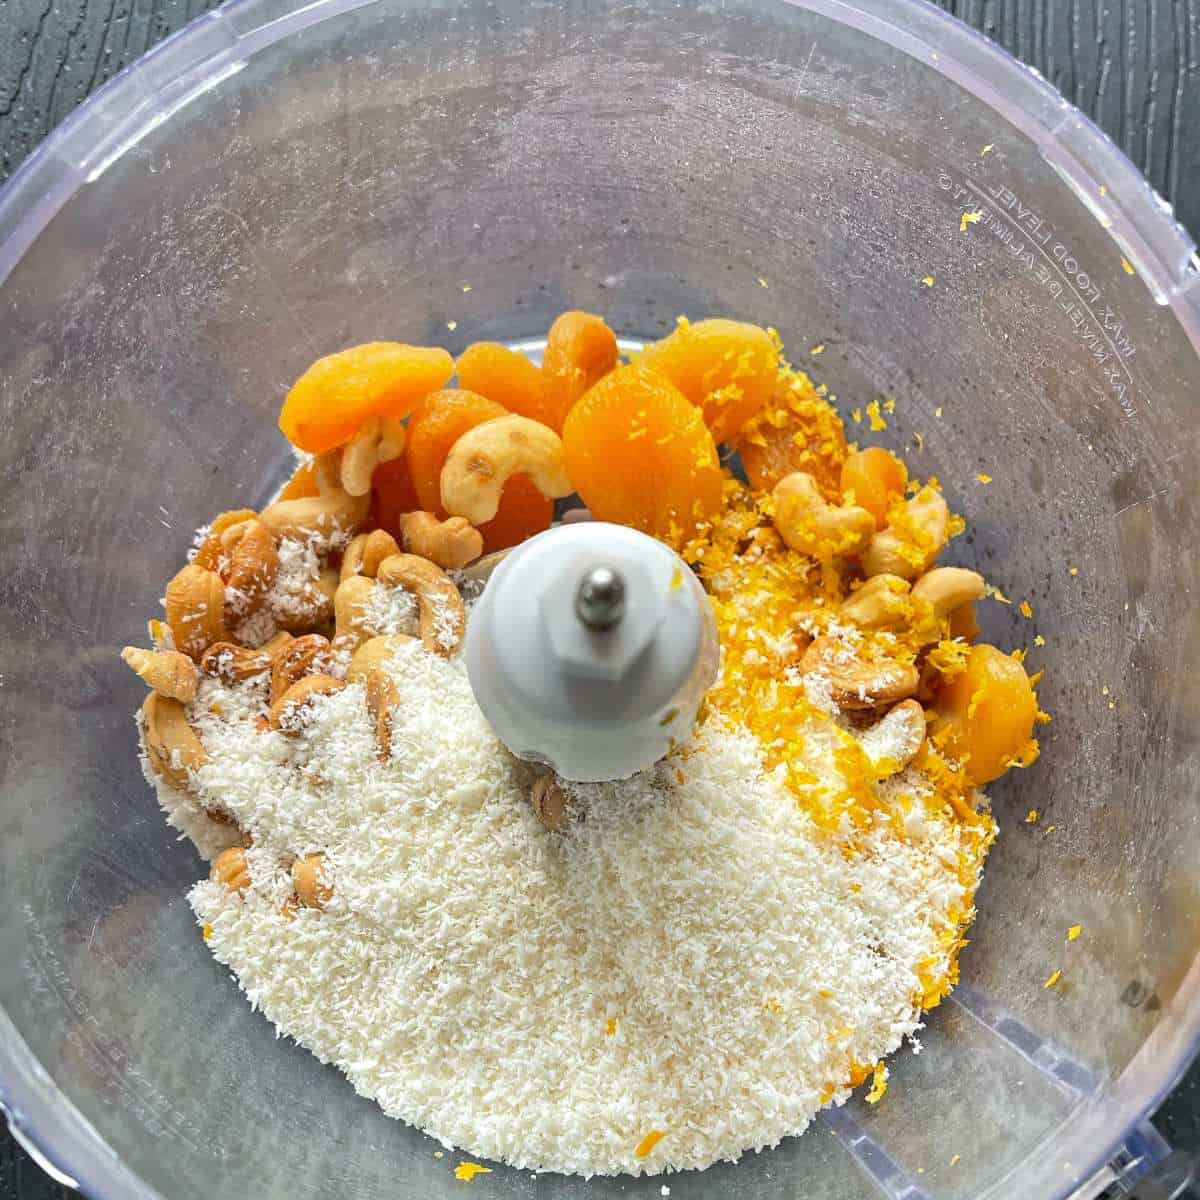 Coconut, lemon zest, honey, cashew nuts and apricots in a small food blender ready to be blended to make Apricot Bliss Balls.